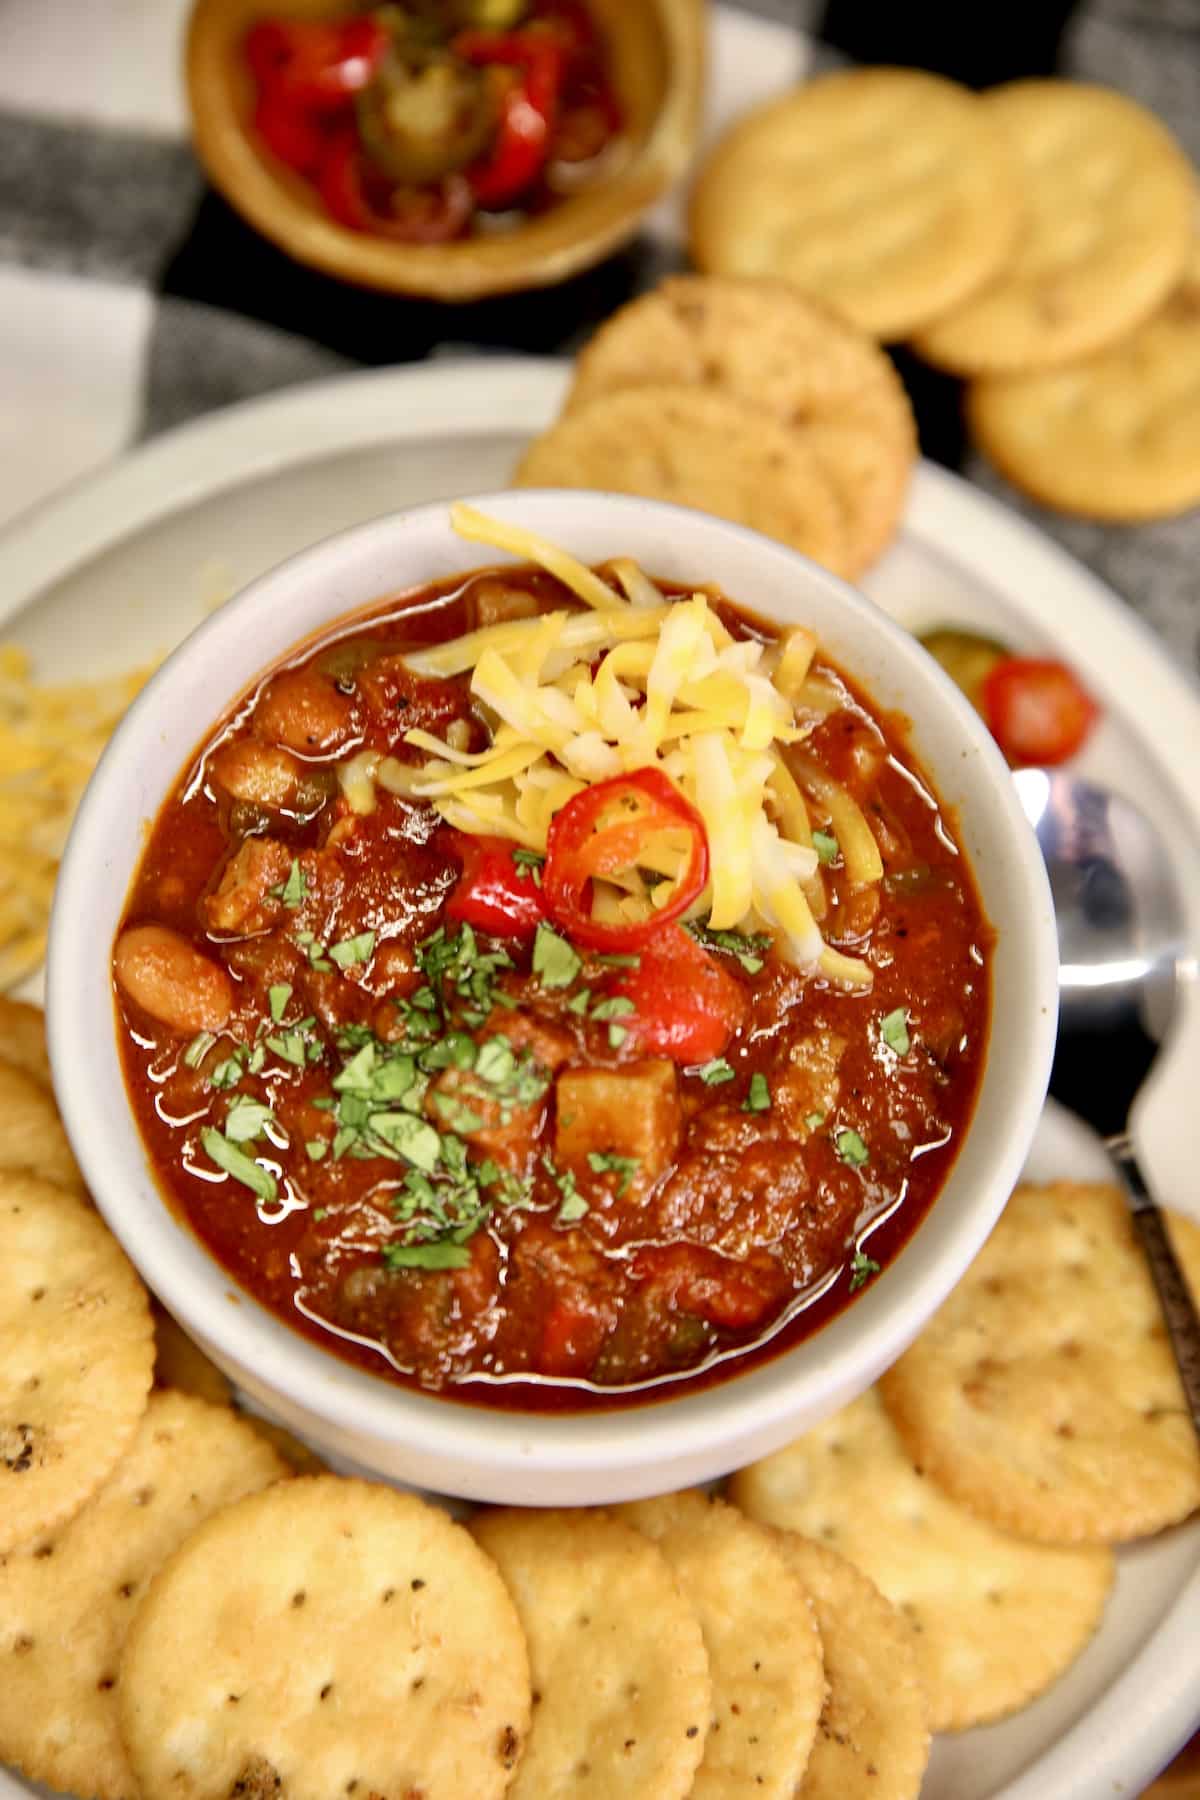 Brisket chili with crackers.